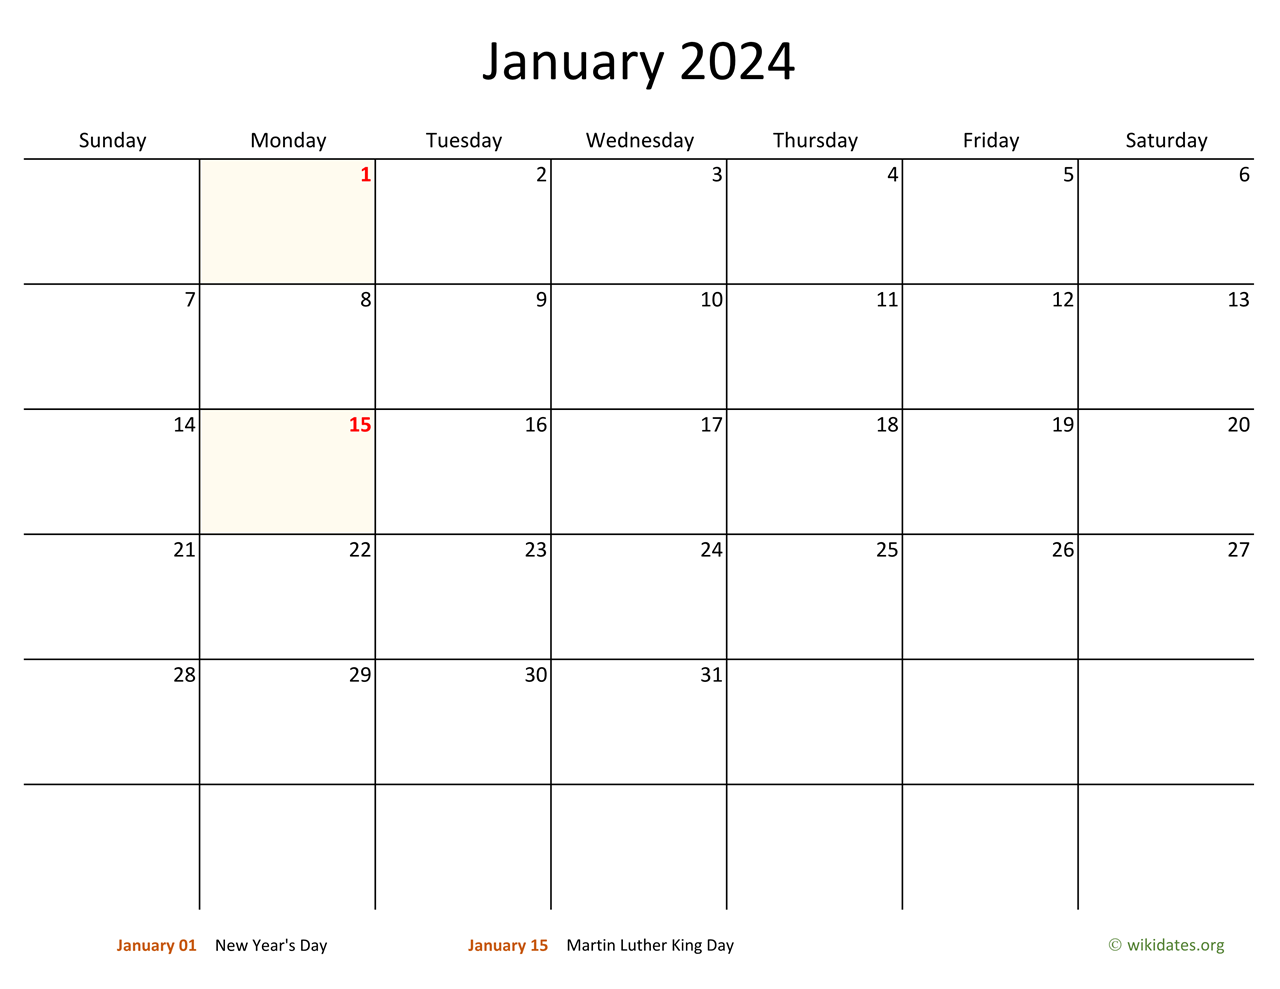 January 2024 Calendar with Bigger boxes | WikiDates.org